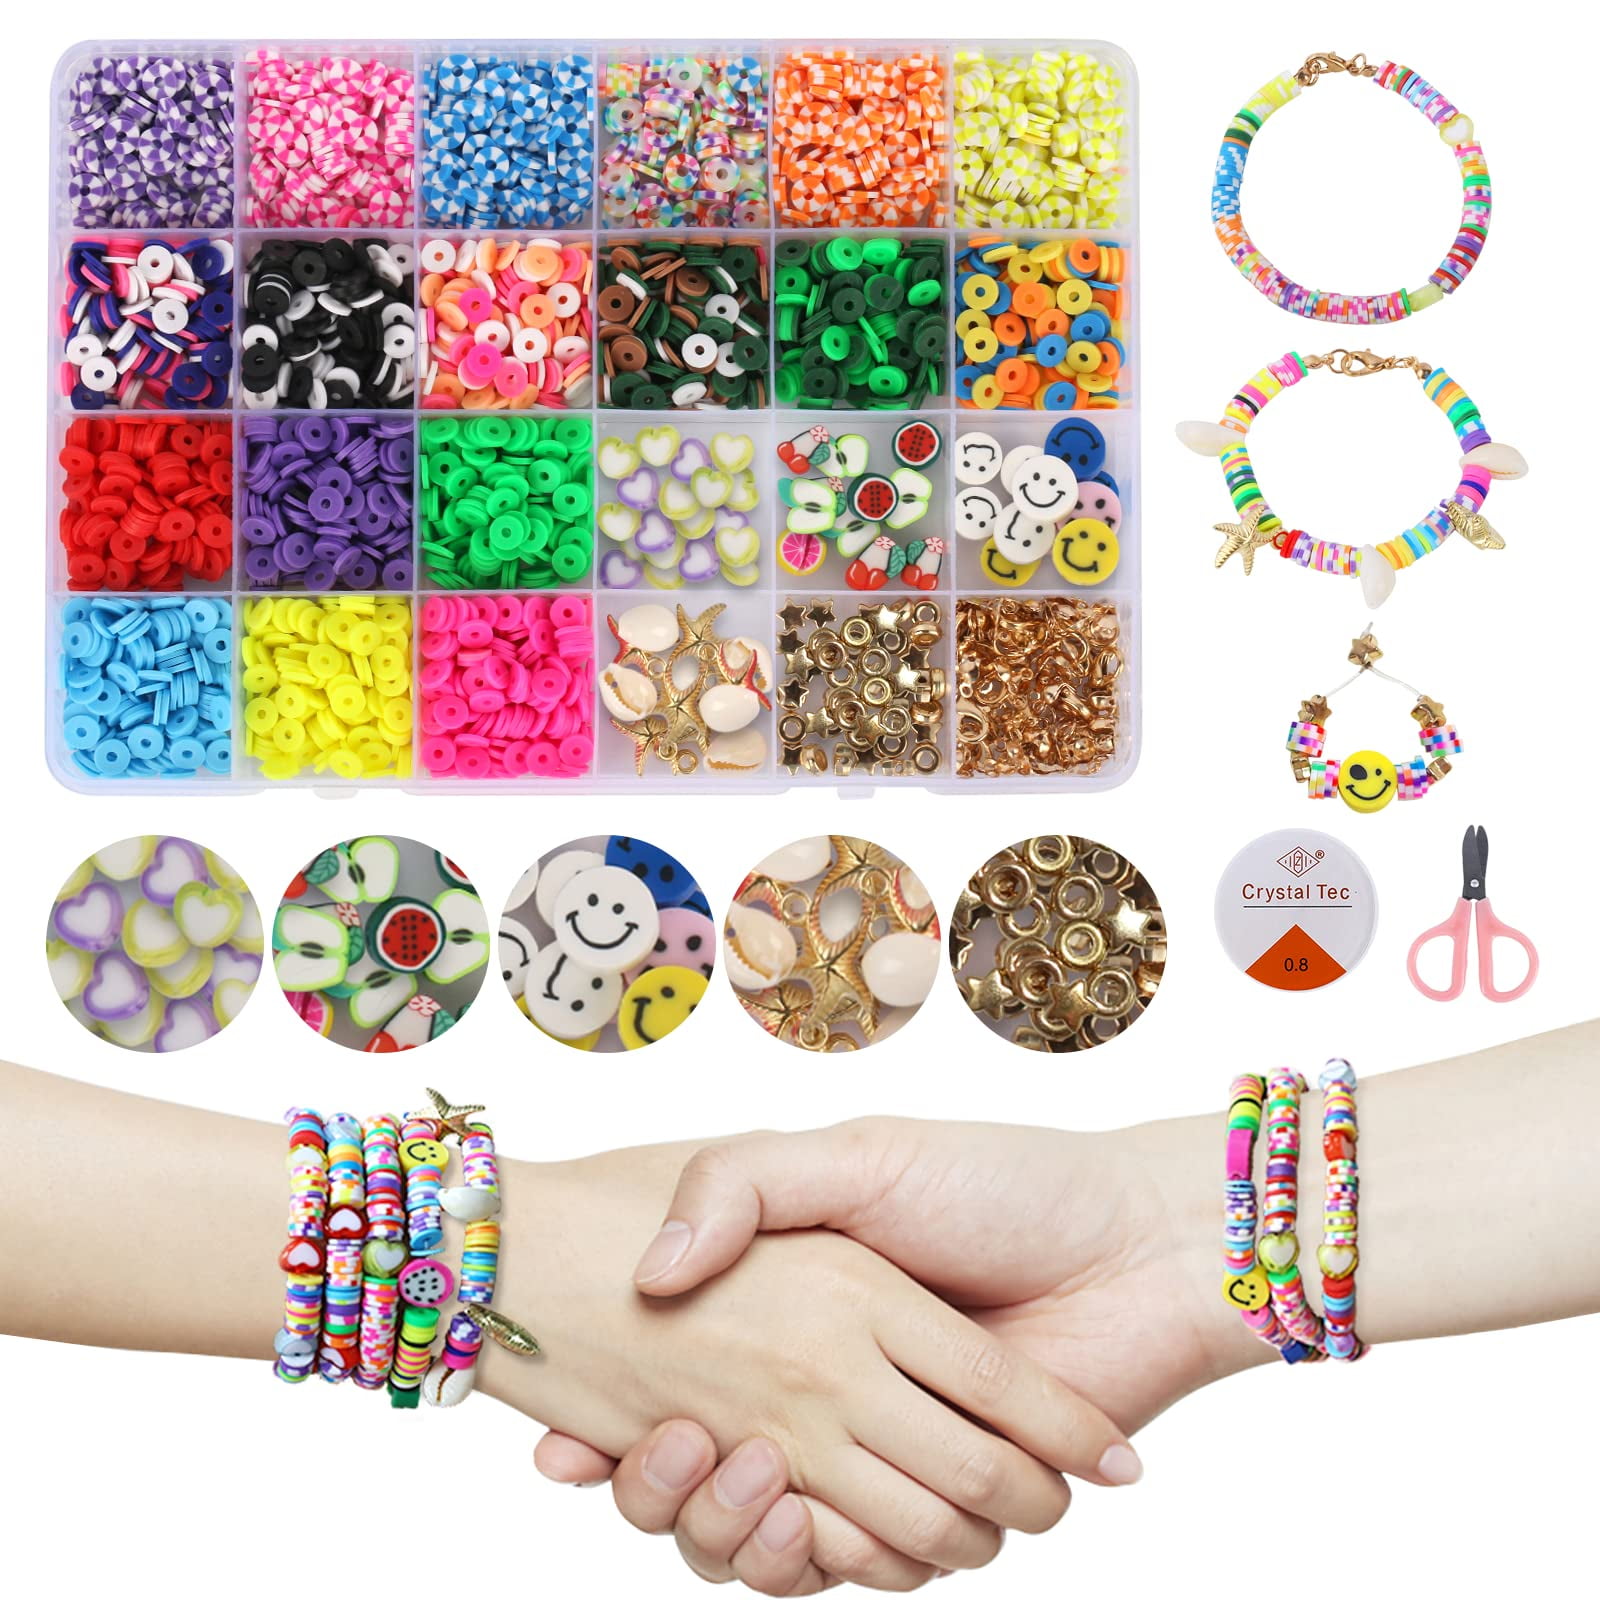 Pearoft Clay Beads Bracelet Making Kit Gifts for 7-12 Years Old Teenage Girls, 8 9 10 11 12 Year Old Girl Gifts Beads for Making Jewellery, Jewelry